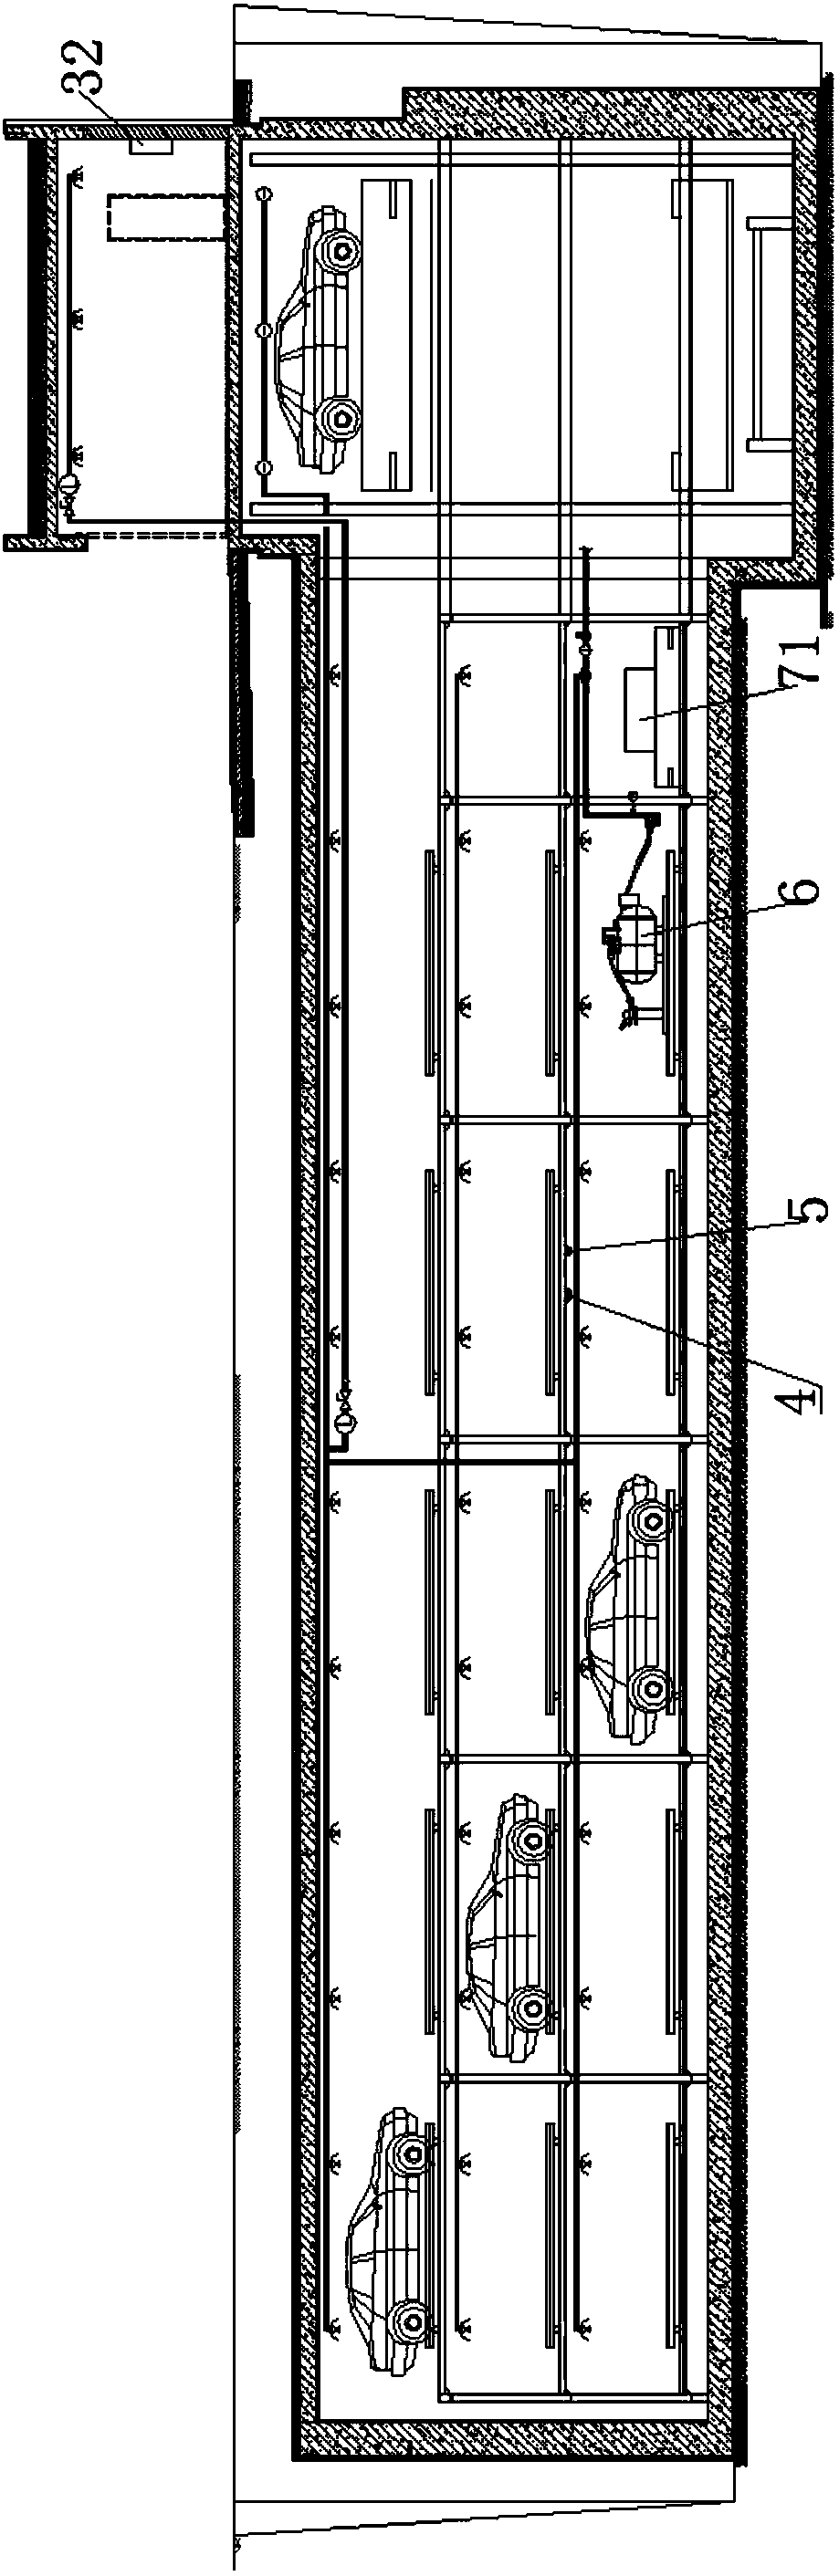 Unmanned mechanical garage movable type fire fighting system and method